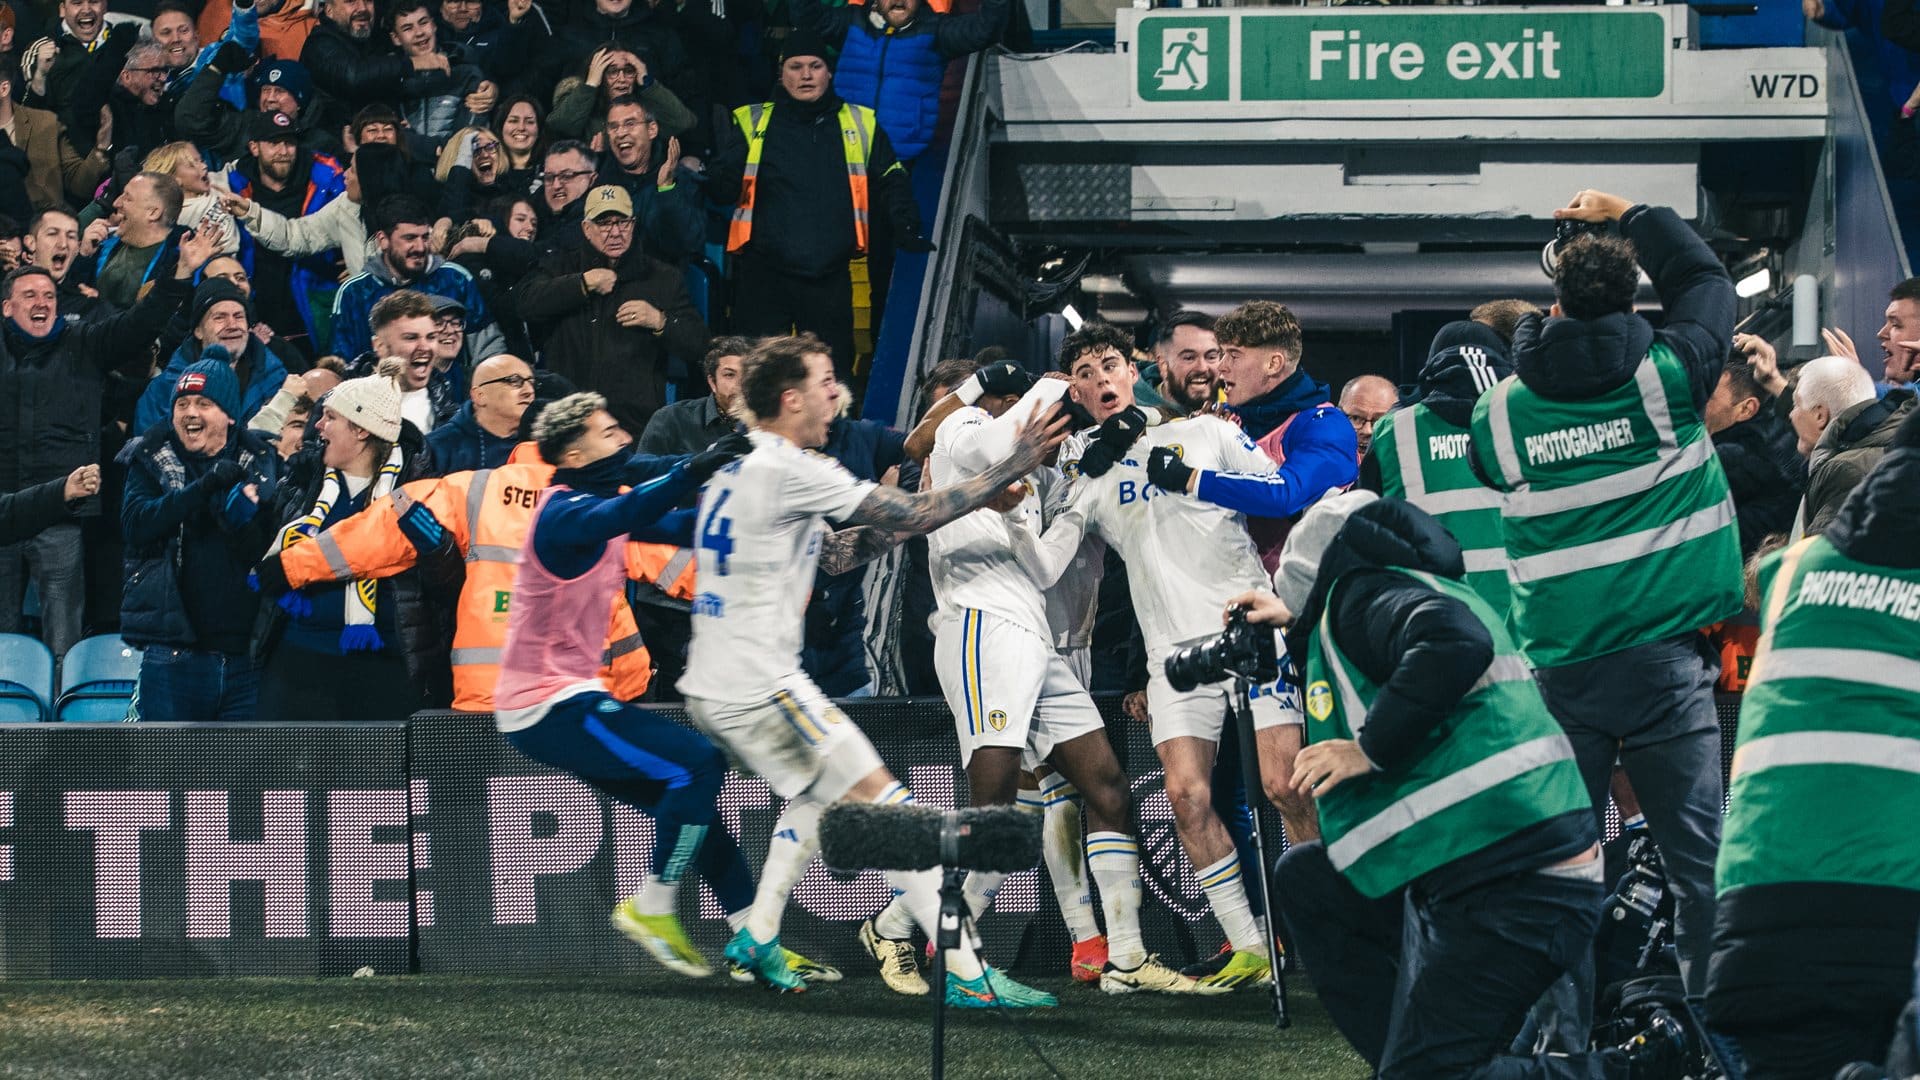 Archie Gray getting pulled around by Charlie Cresswell, as to the left Leeds players run in to celebrate with him, and to the right green-jacketed photographers run to the scene